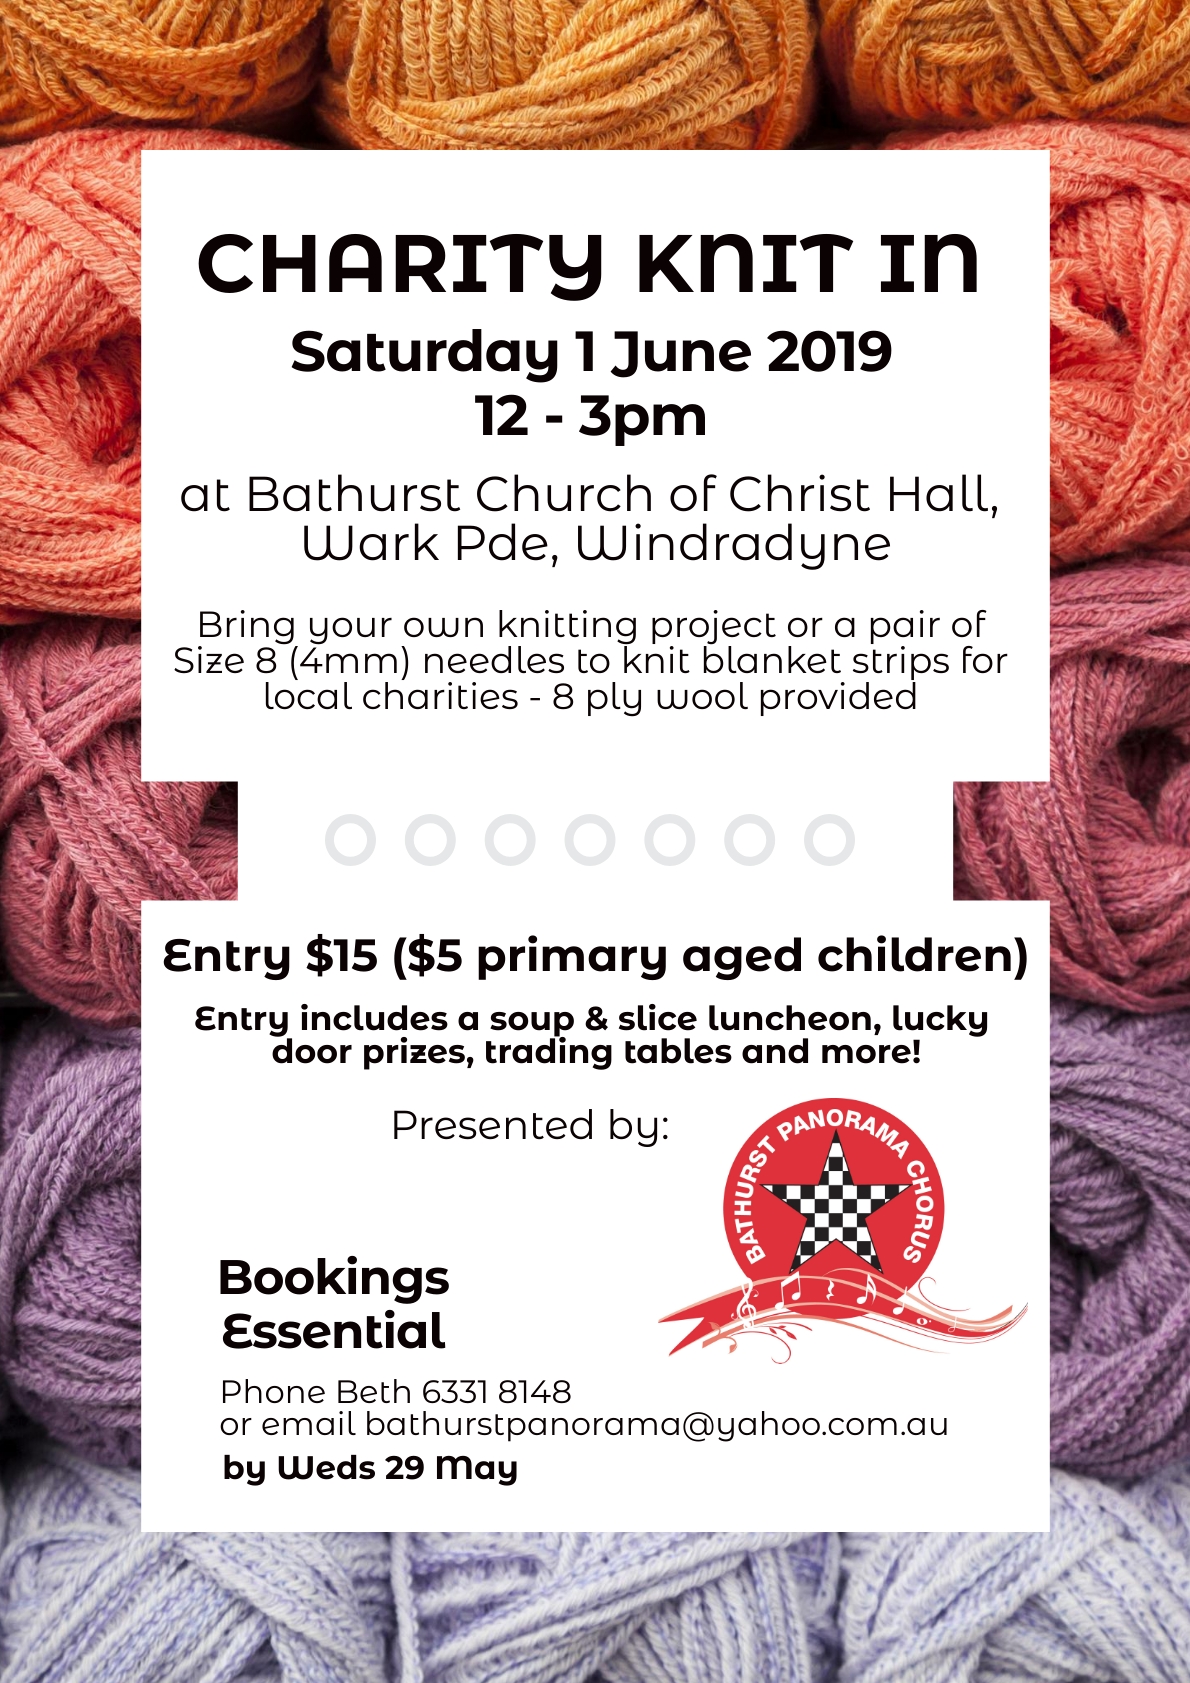 Annual Charity Knit In